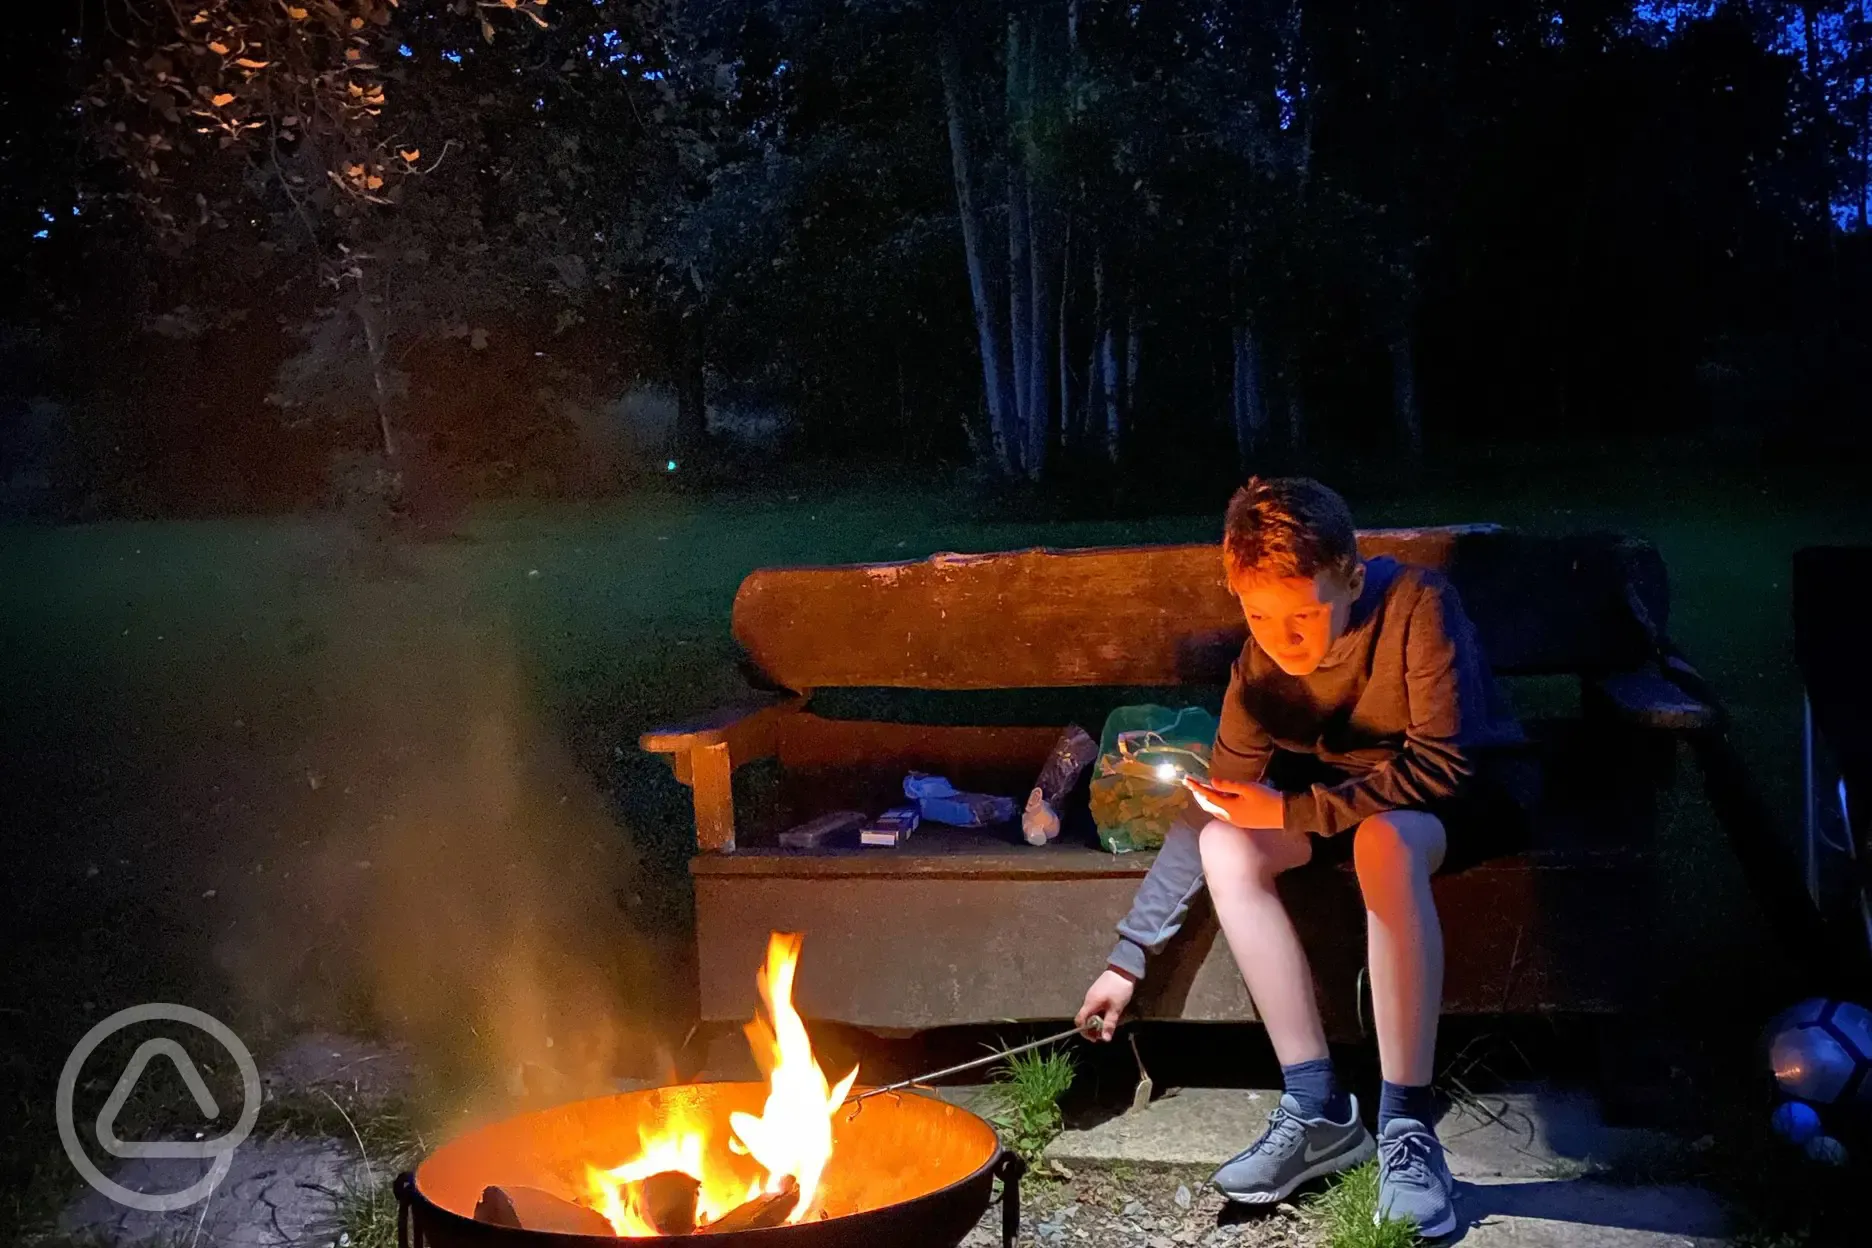 Toasting marshmallows round your own private campfire 